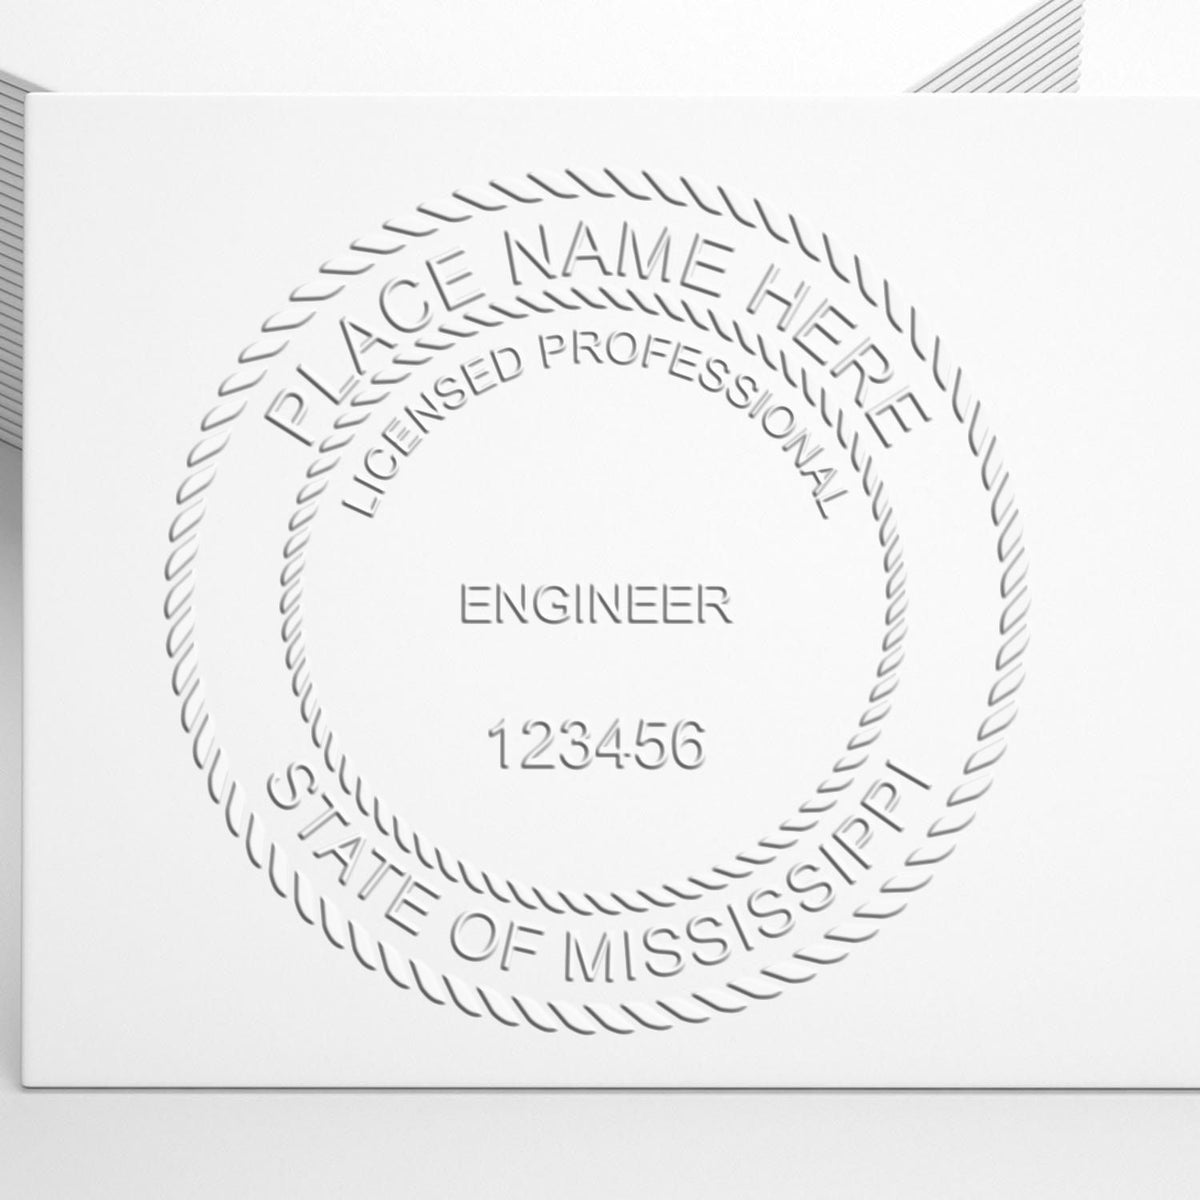 An alternative view of the Heavy Duty Cast Iron Mississippi Engineer Seal Embosser stamped on a sheet of paper showing the image in use